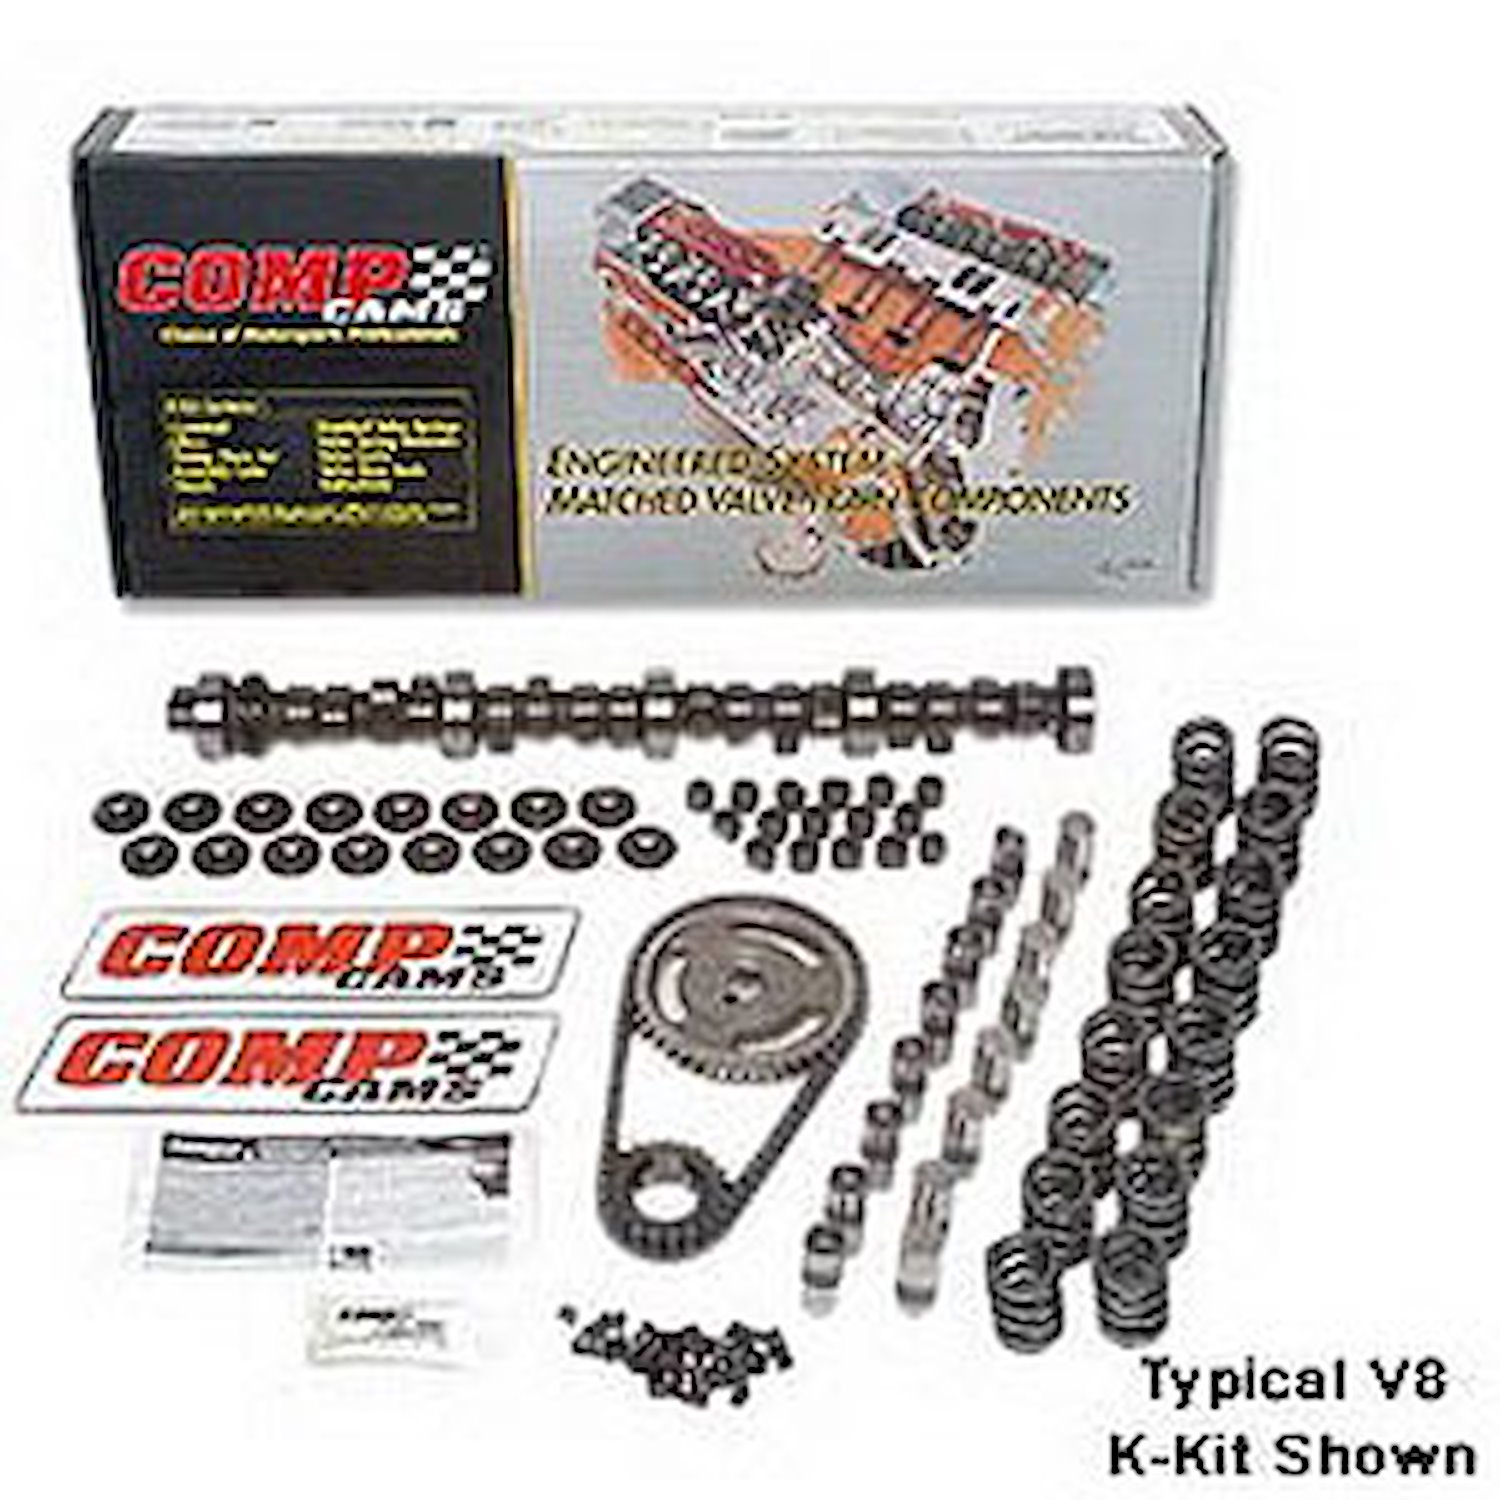 Xtreme Energy 268H Hydraulic Flat Tappet Camshaft Complete Kit Lift .454"/.454" Duration 268/268 RPM Range 1500-5500